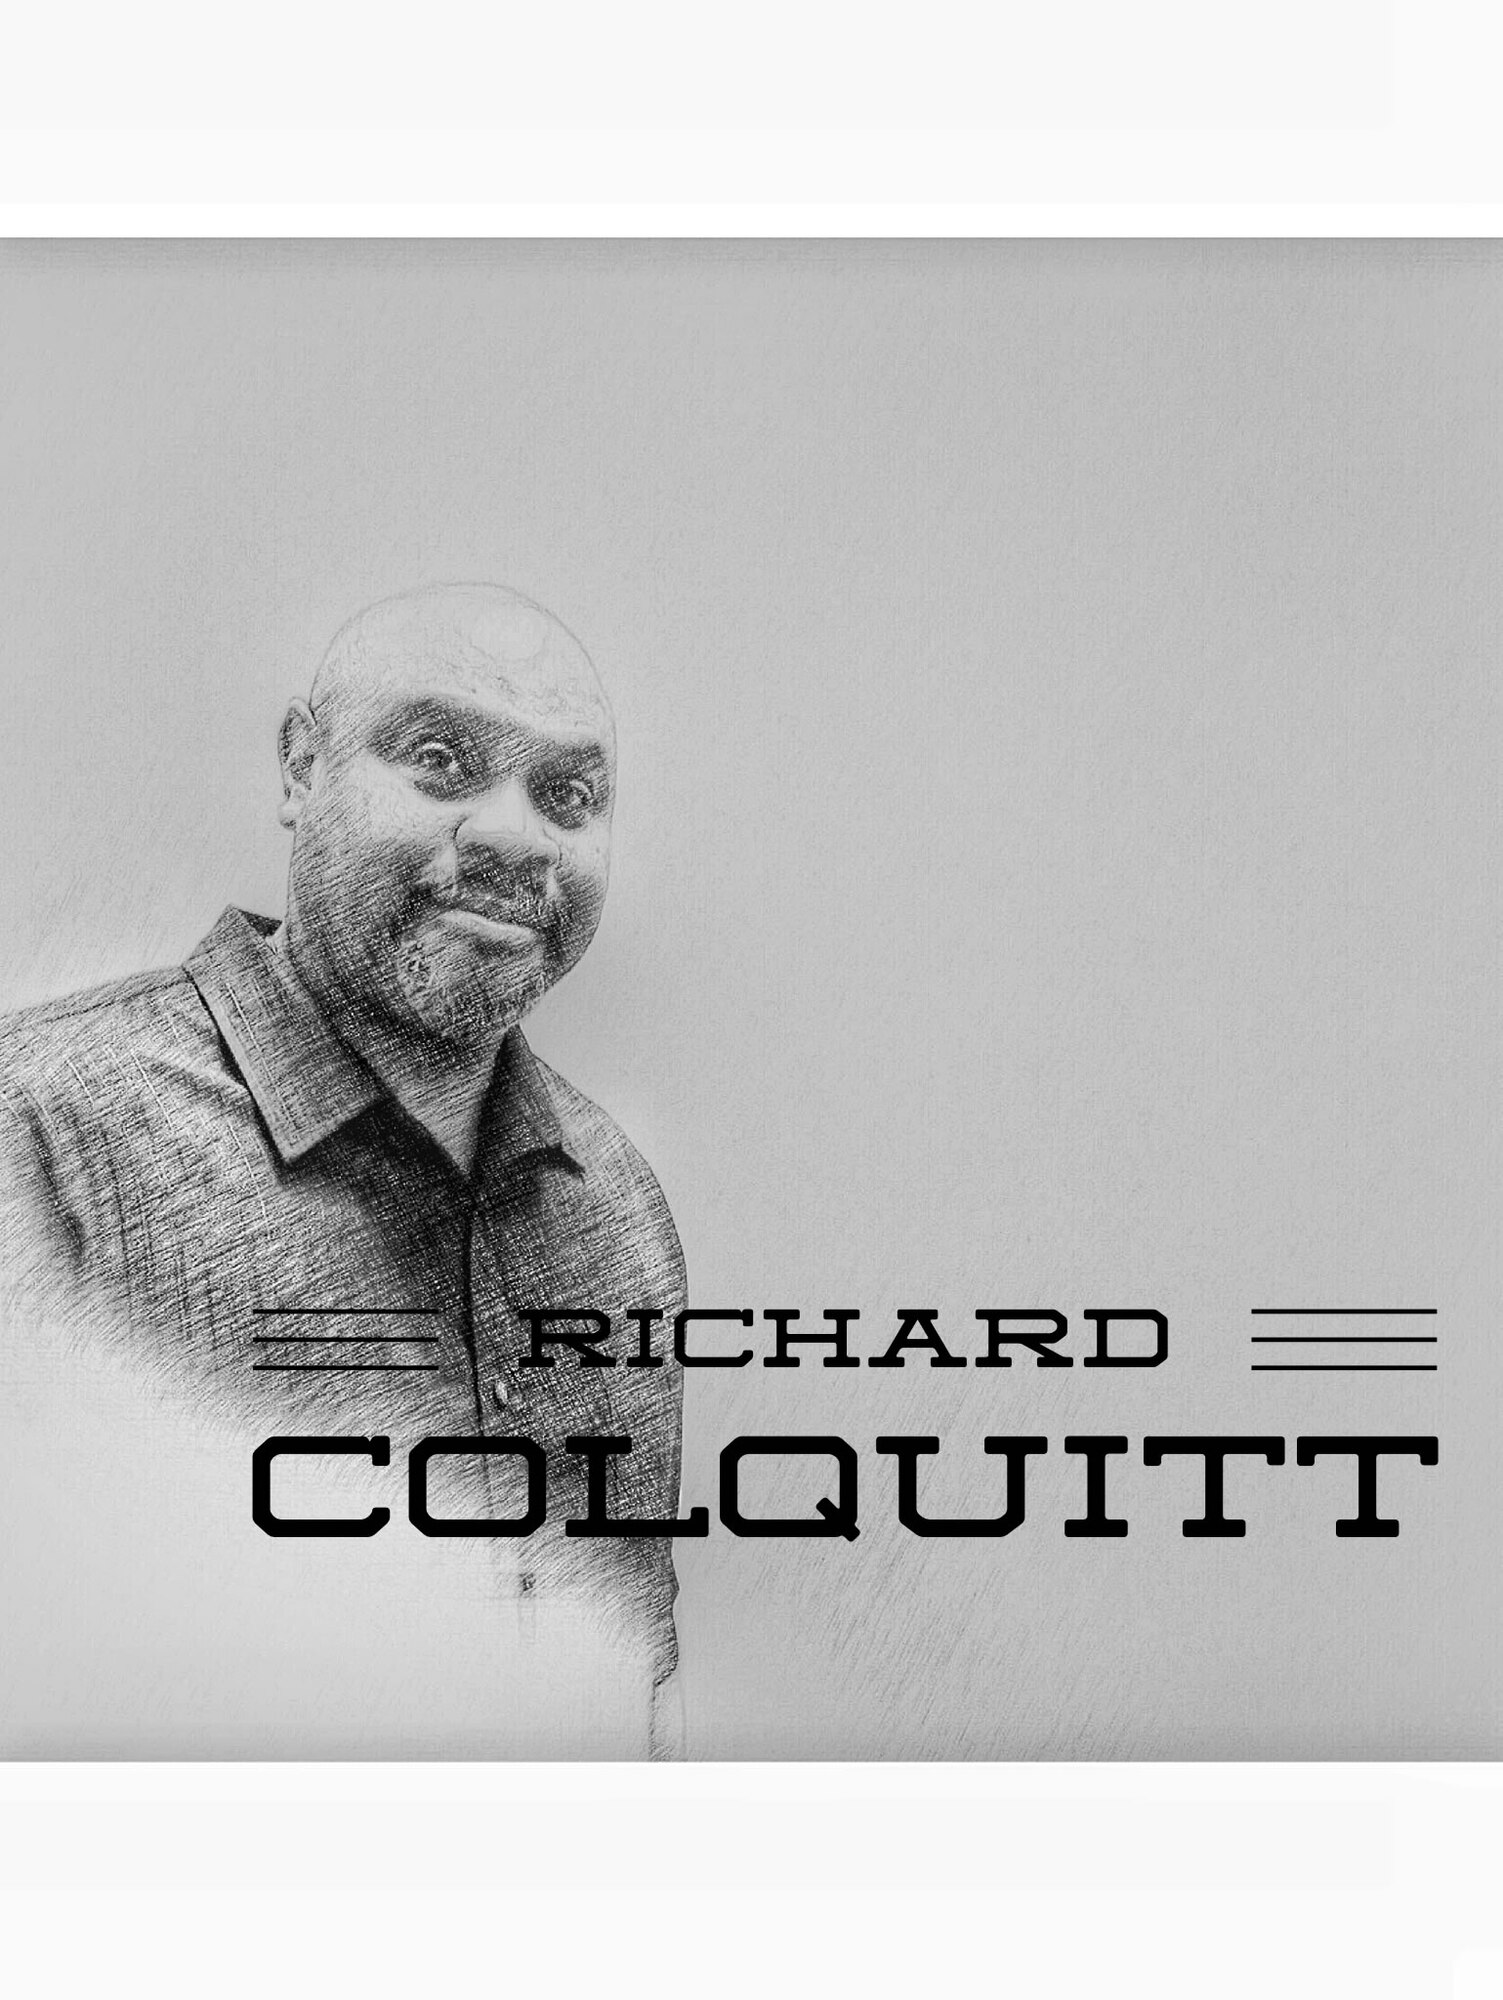 Getting to know you: Richard Colquitt  (U.S. Air Force illustration by Claude Lazzara)